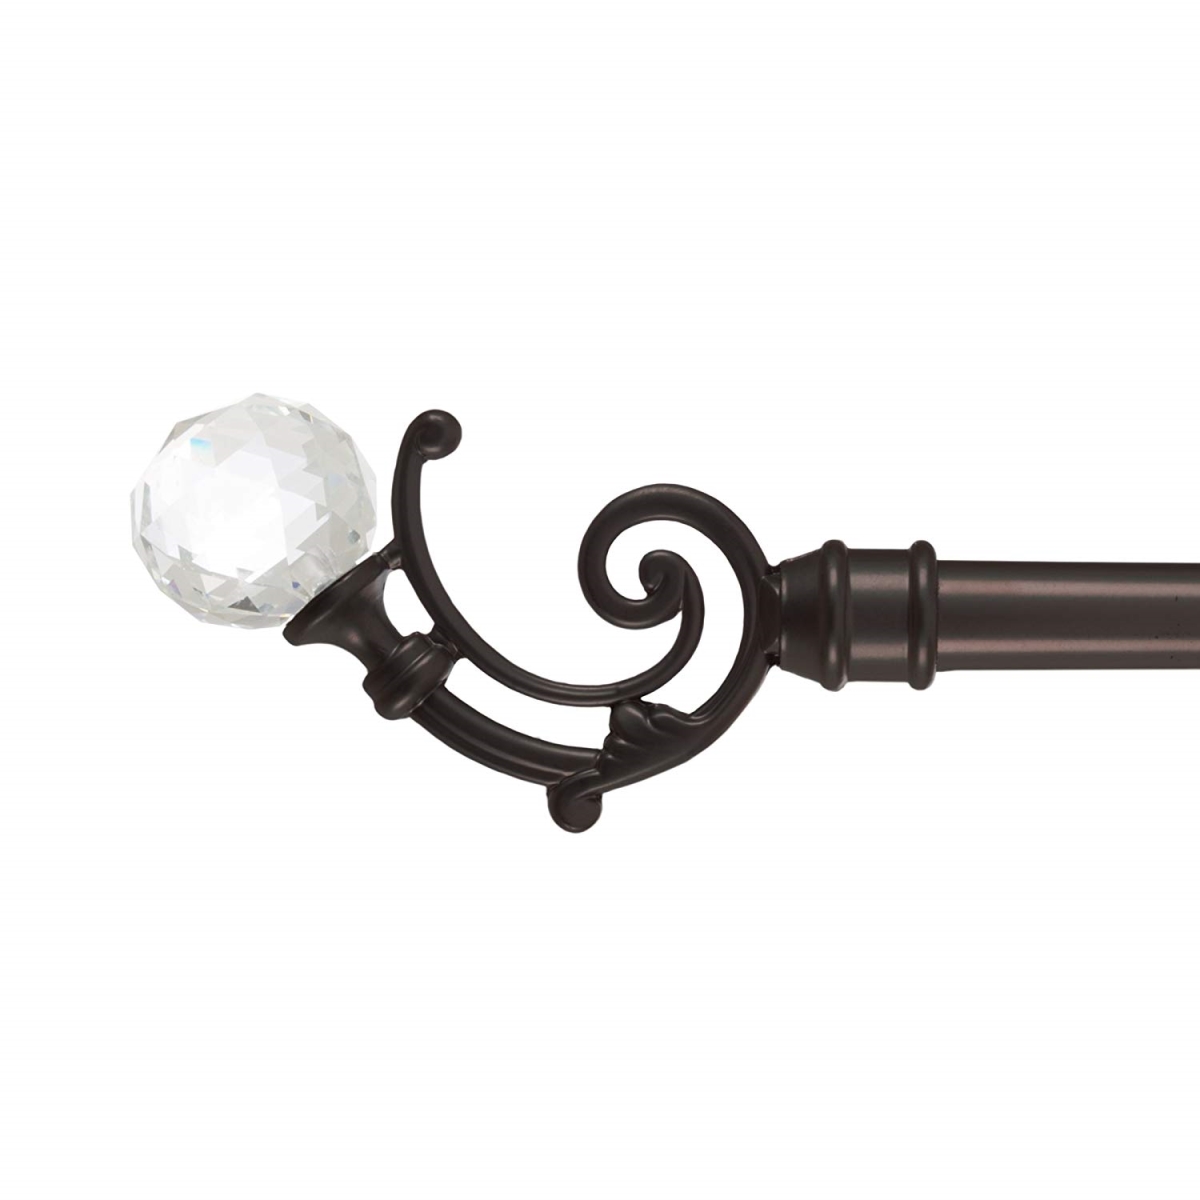 63a-47501 Curtain Rod Mounting Hardware Crystal Ball Finials, Bronze - 48-86 In.